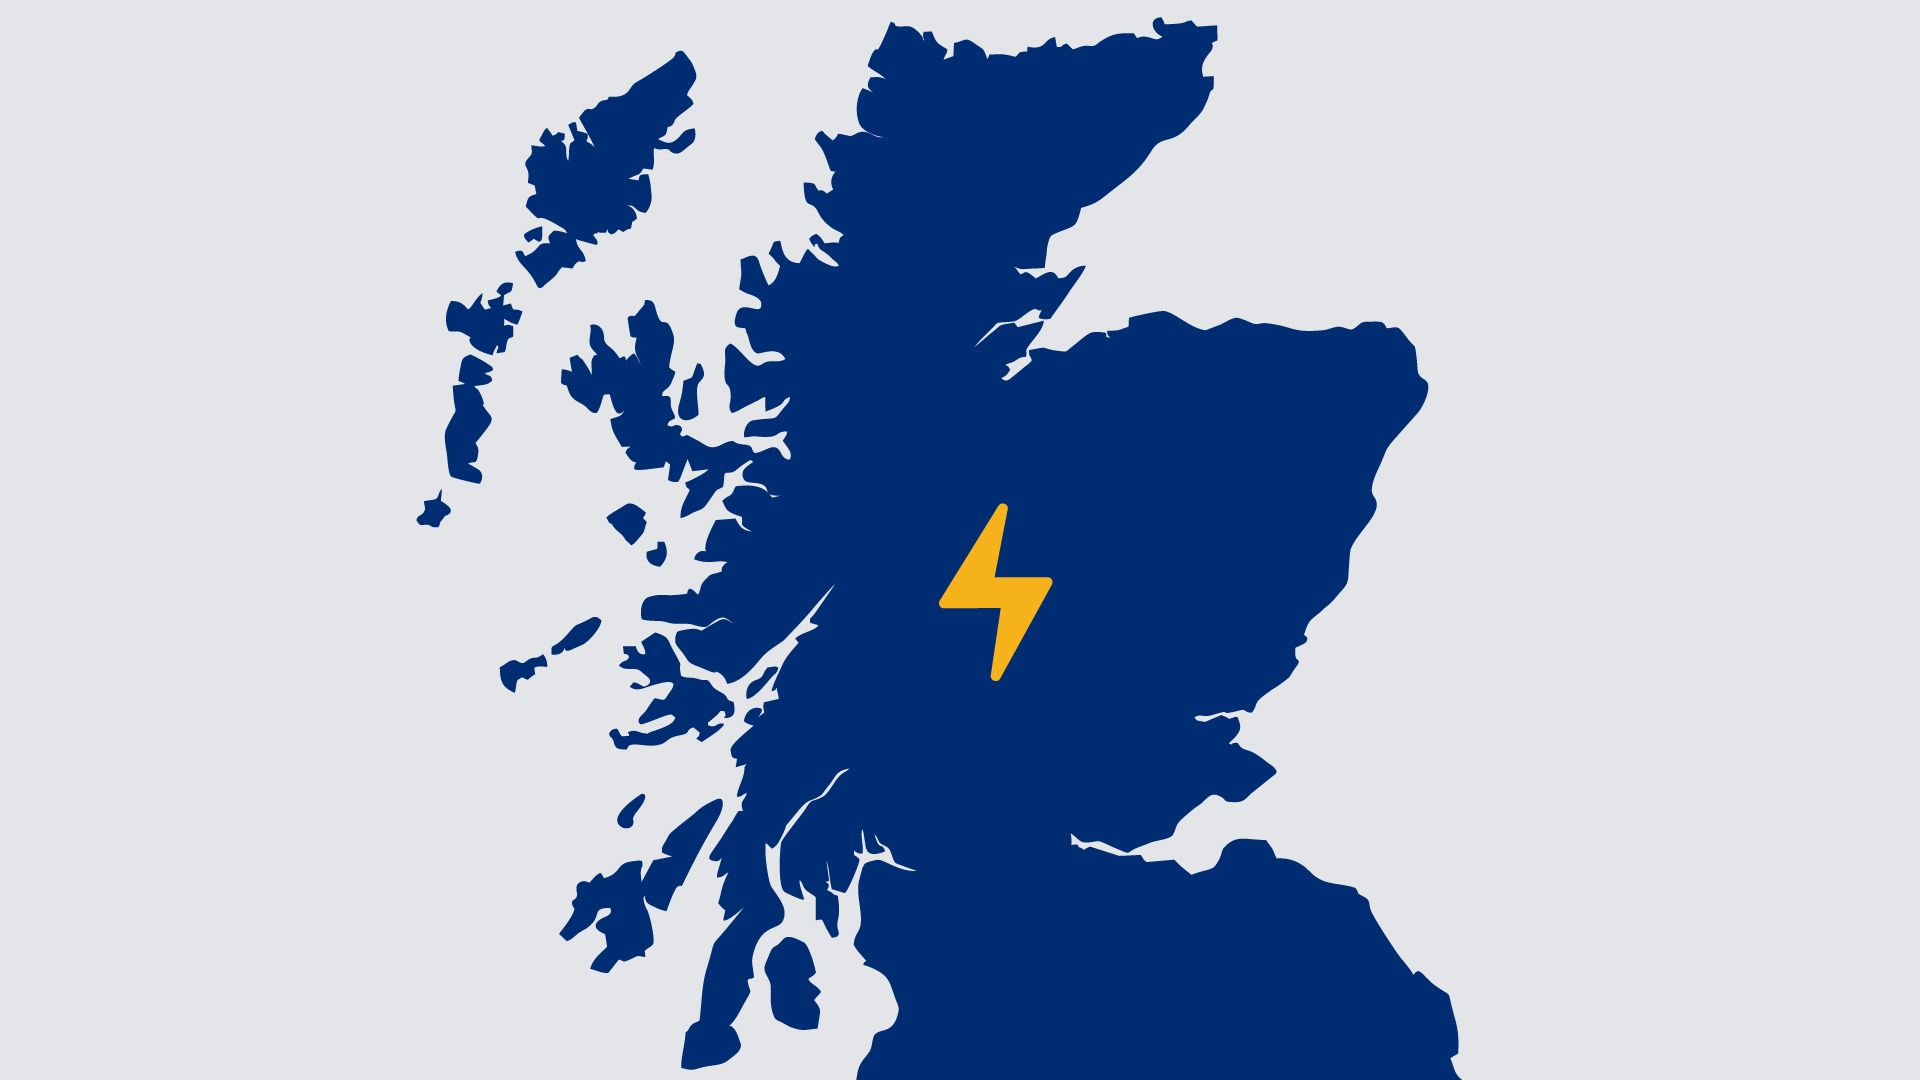 Spittal – Loch Buidhe – Beauly 400kV Connection